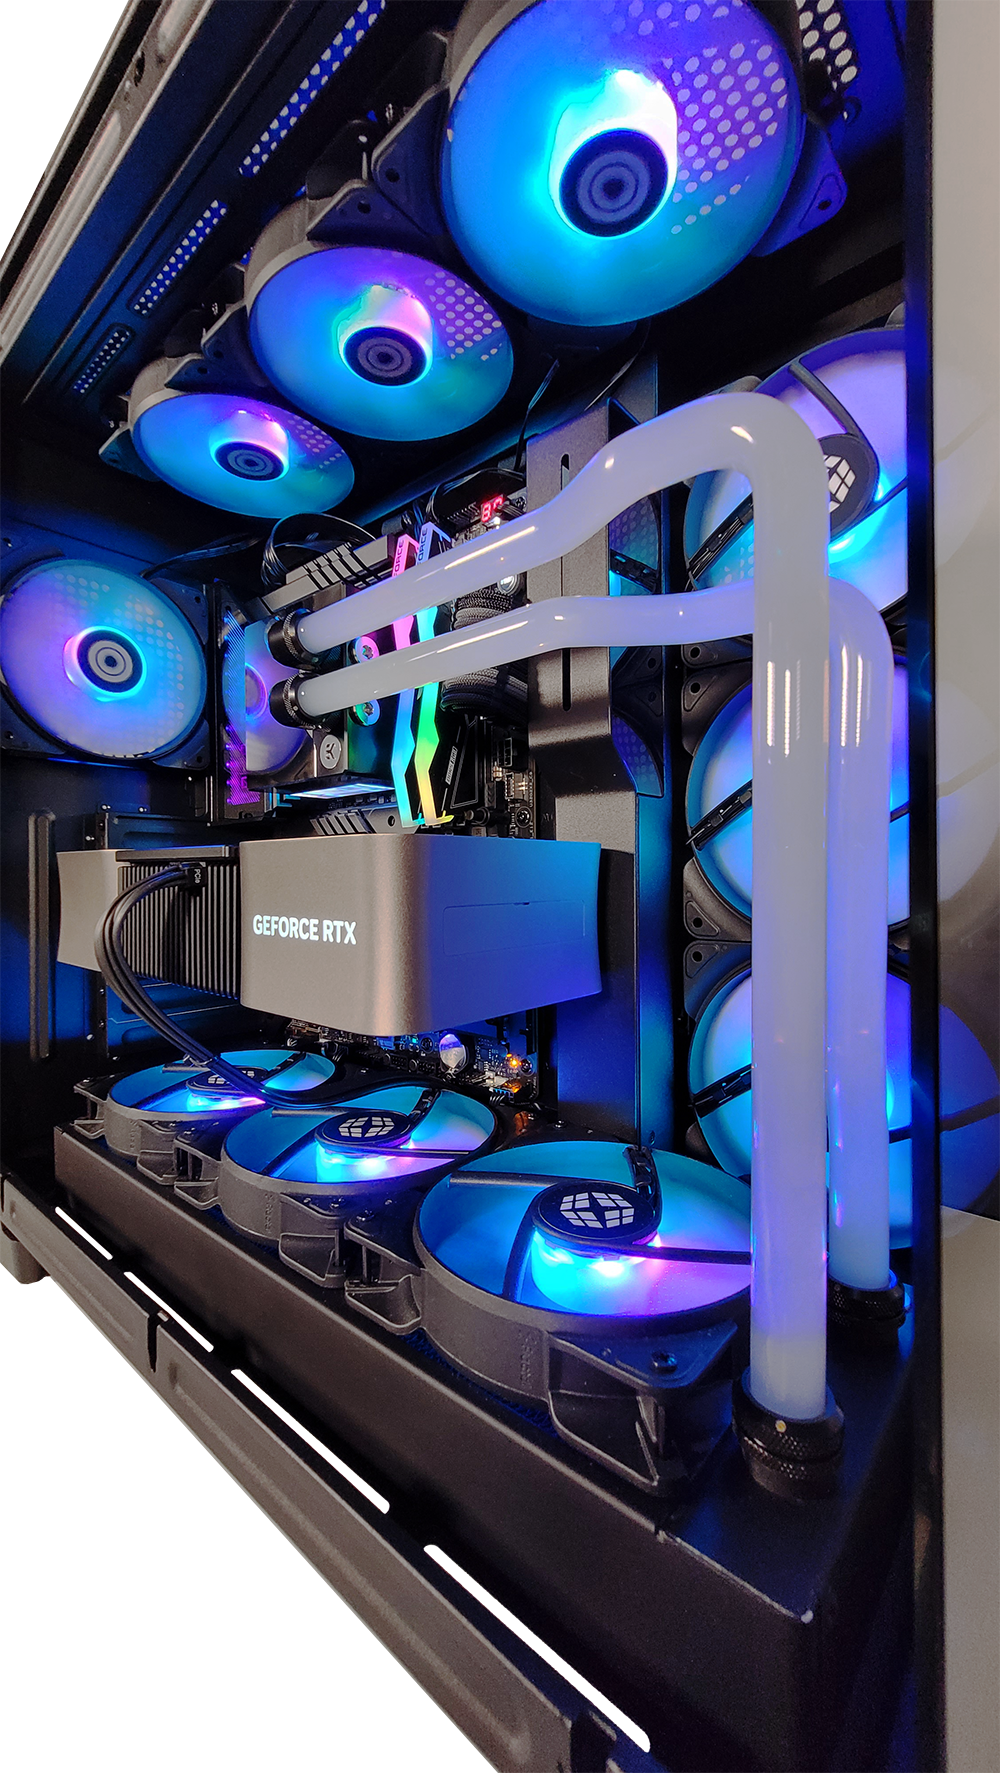 NZXT launches H9 Flow and H9 Elite mid-tower chassis supporting up